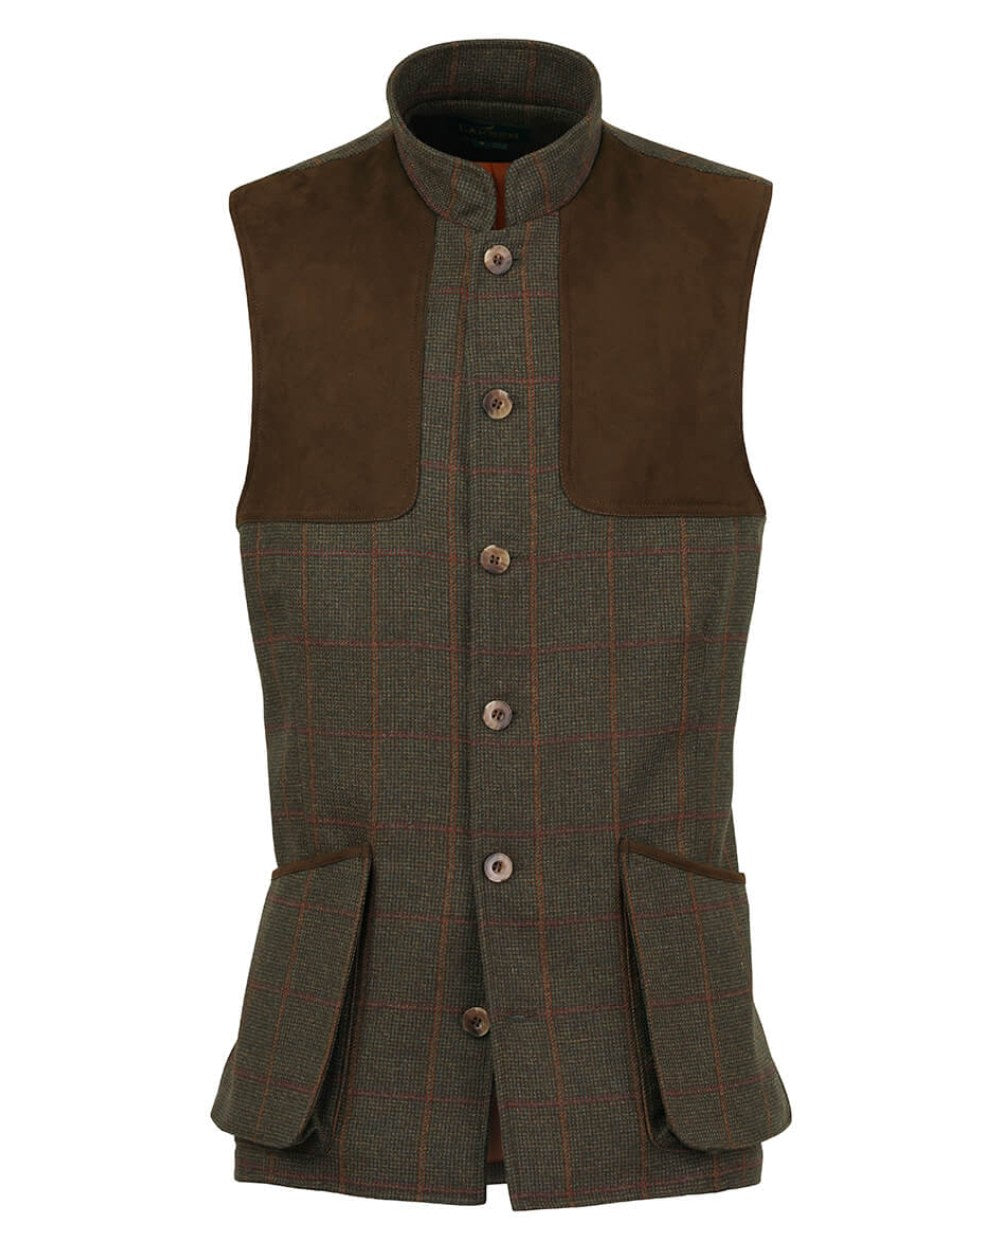 Laksen Hastings Mulland Shooting Vest On A White Background